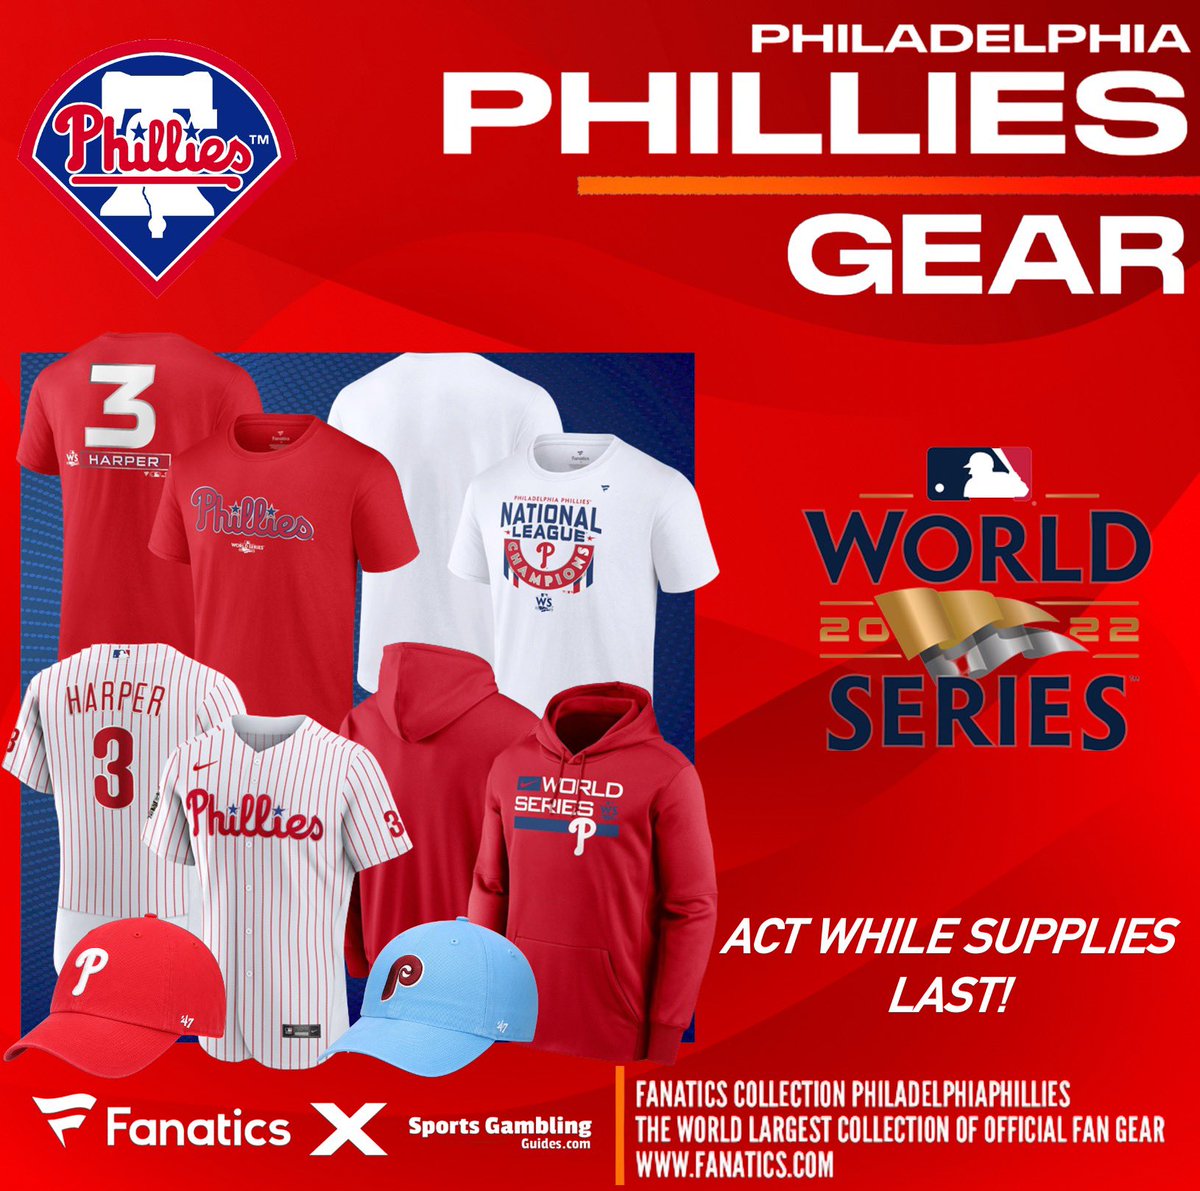 PHILLIES WORLD SERIES GEAR, @Fanatics, MLB POSTSEASON SPECIAL! PHILLIES FANS‼️ Get awesome deals on your team’s postseason gear today at Fanatics using THIS PROMO LINK: fanatics.93n6tx.net/65PHILS 📈 DEAL ENDS SOON! 🤝